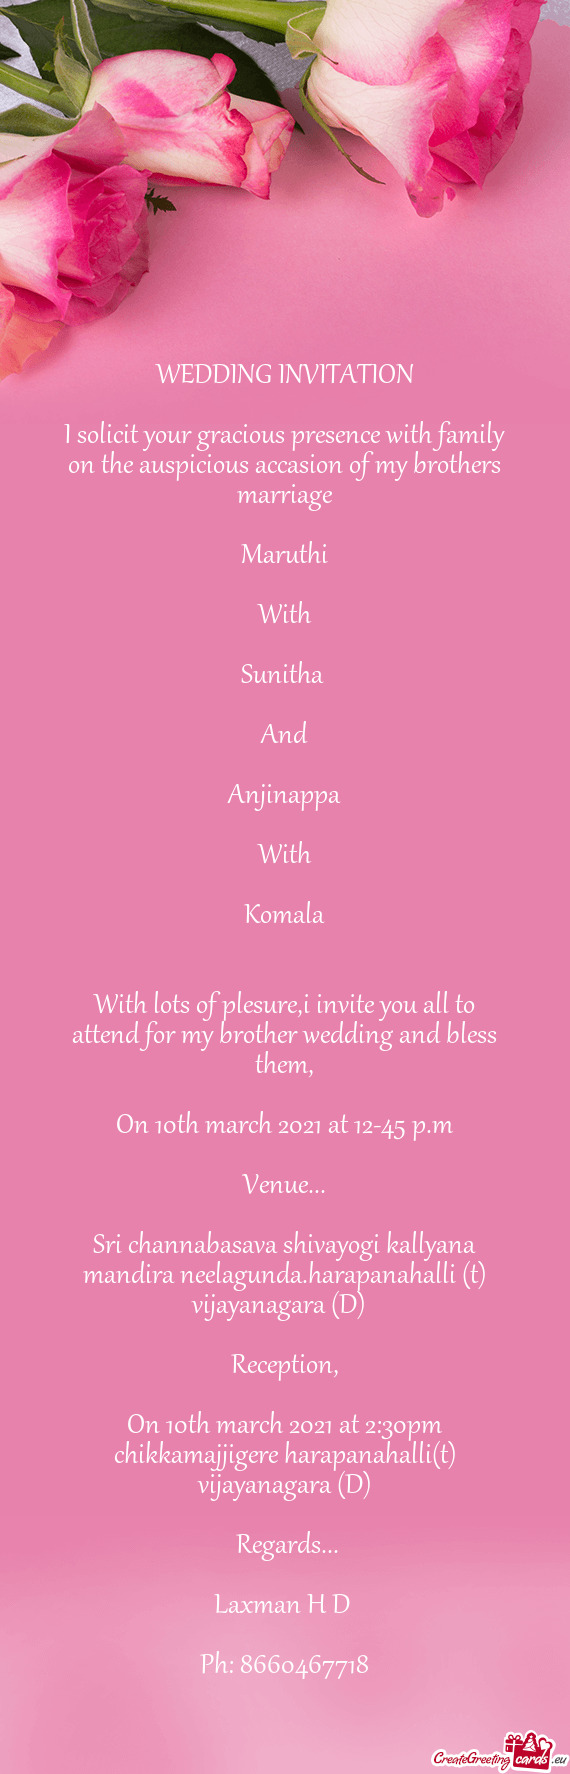 I solicit your gracious presence with family on the auspicious accasion of my brothers marriage